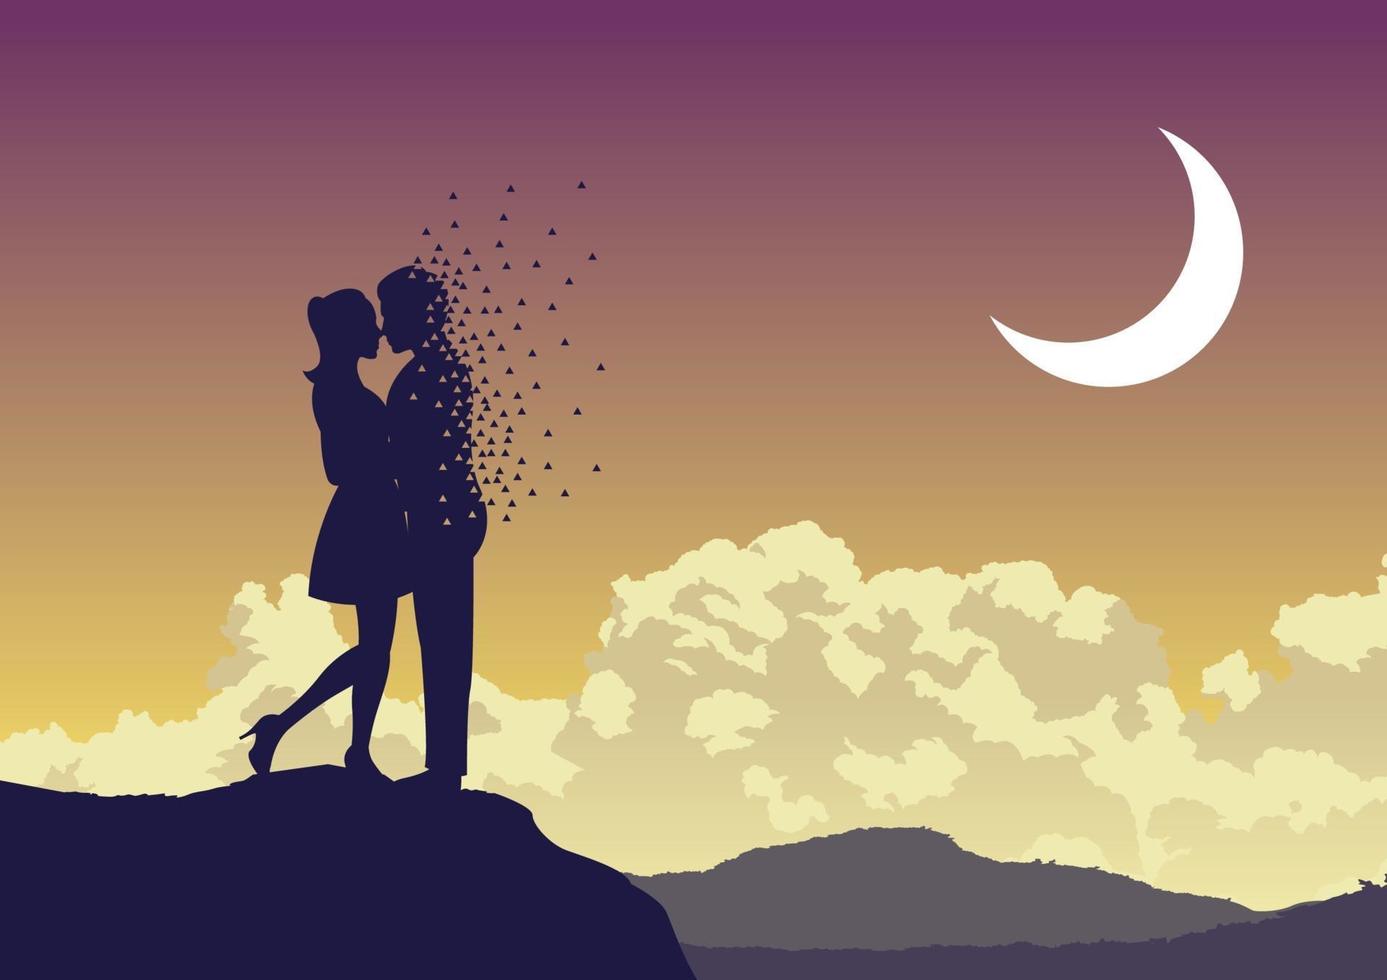 Silhouette design of couple hugging while man is disappearing vector